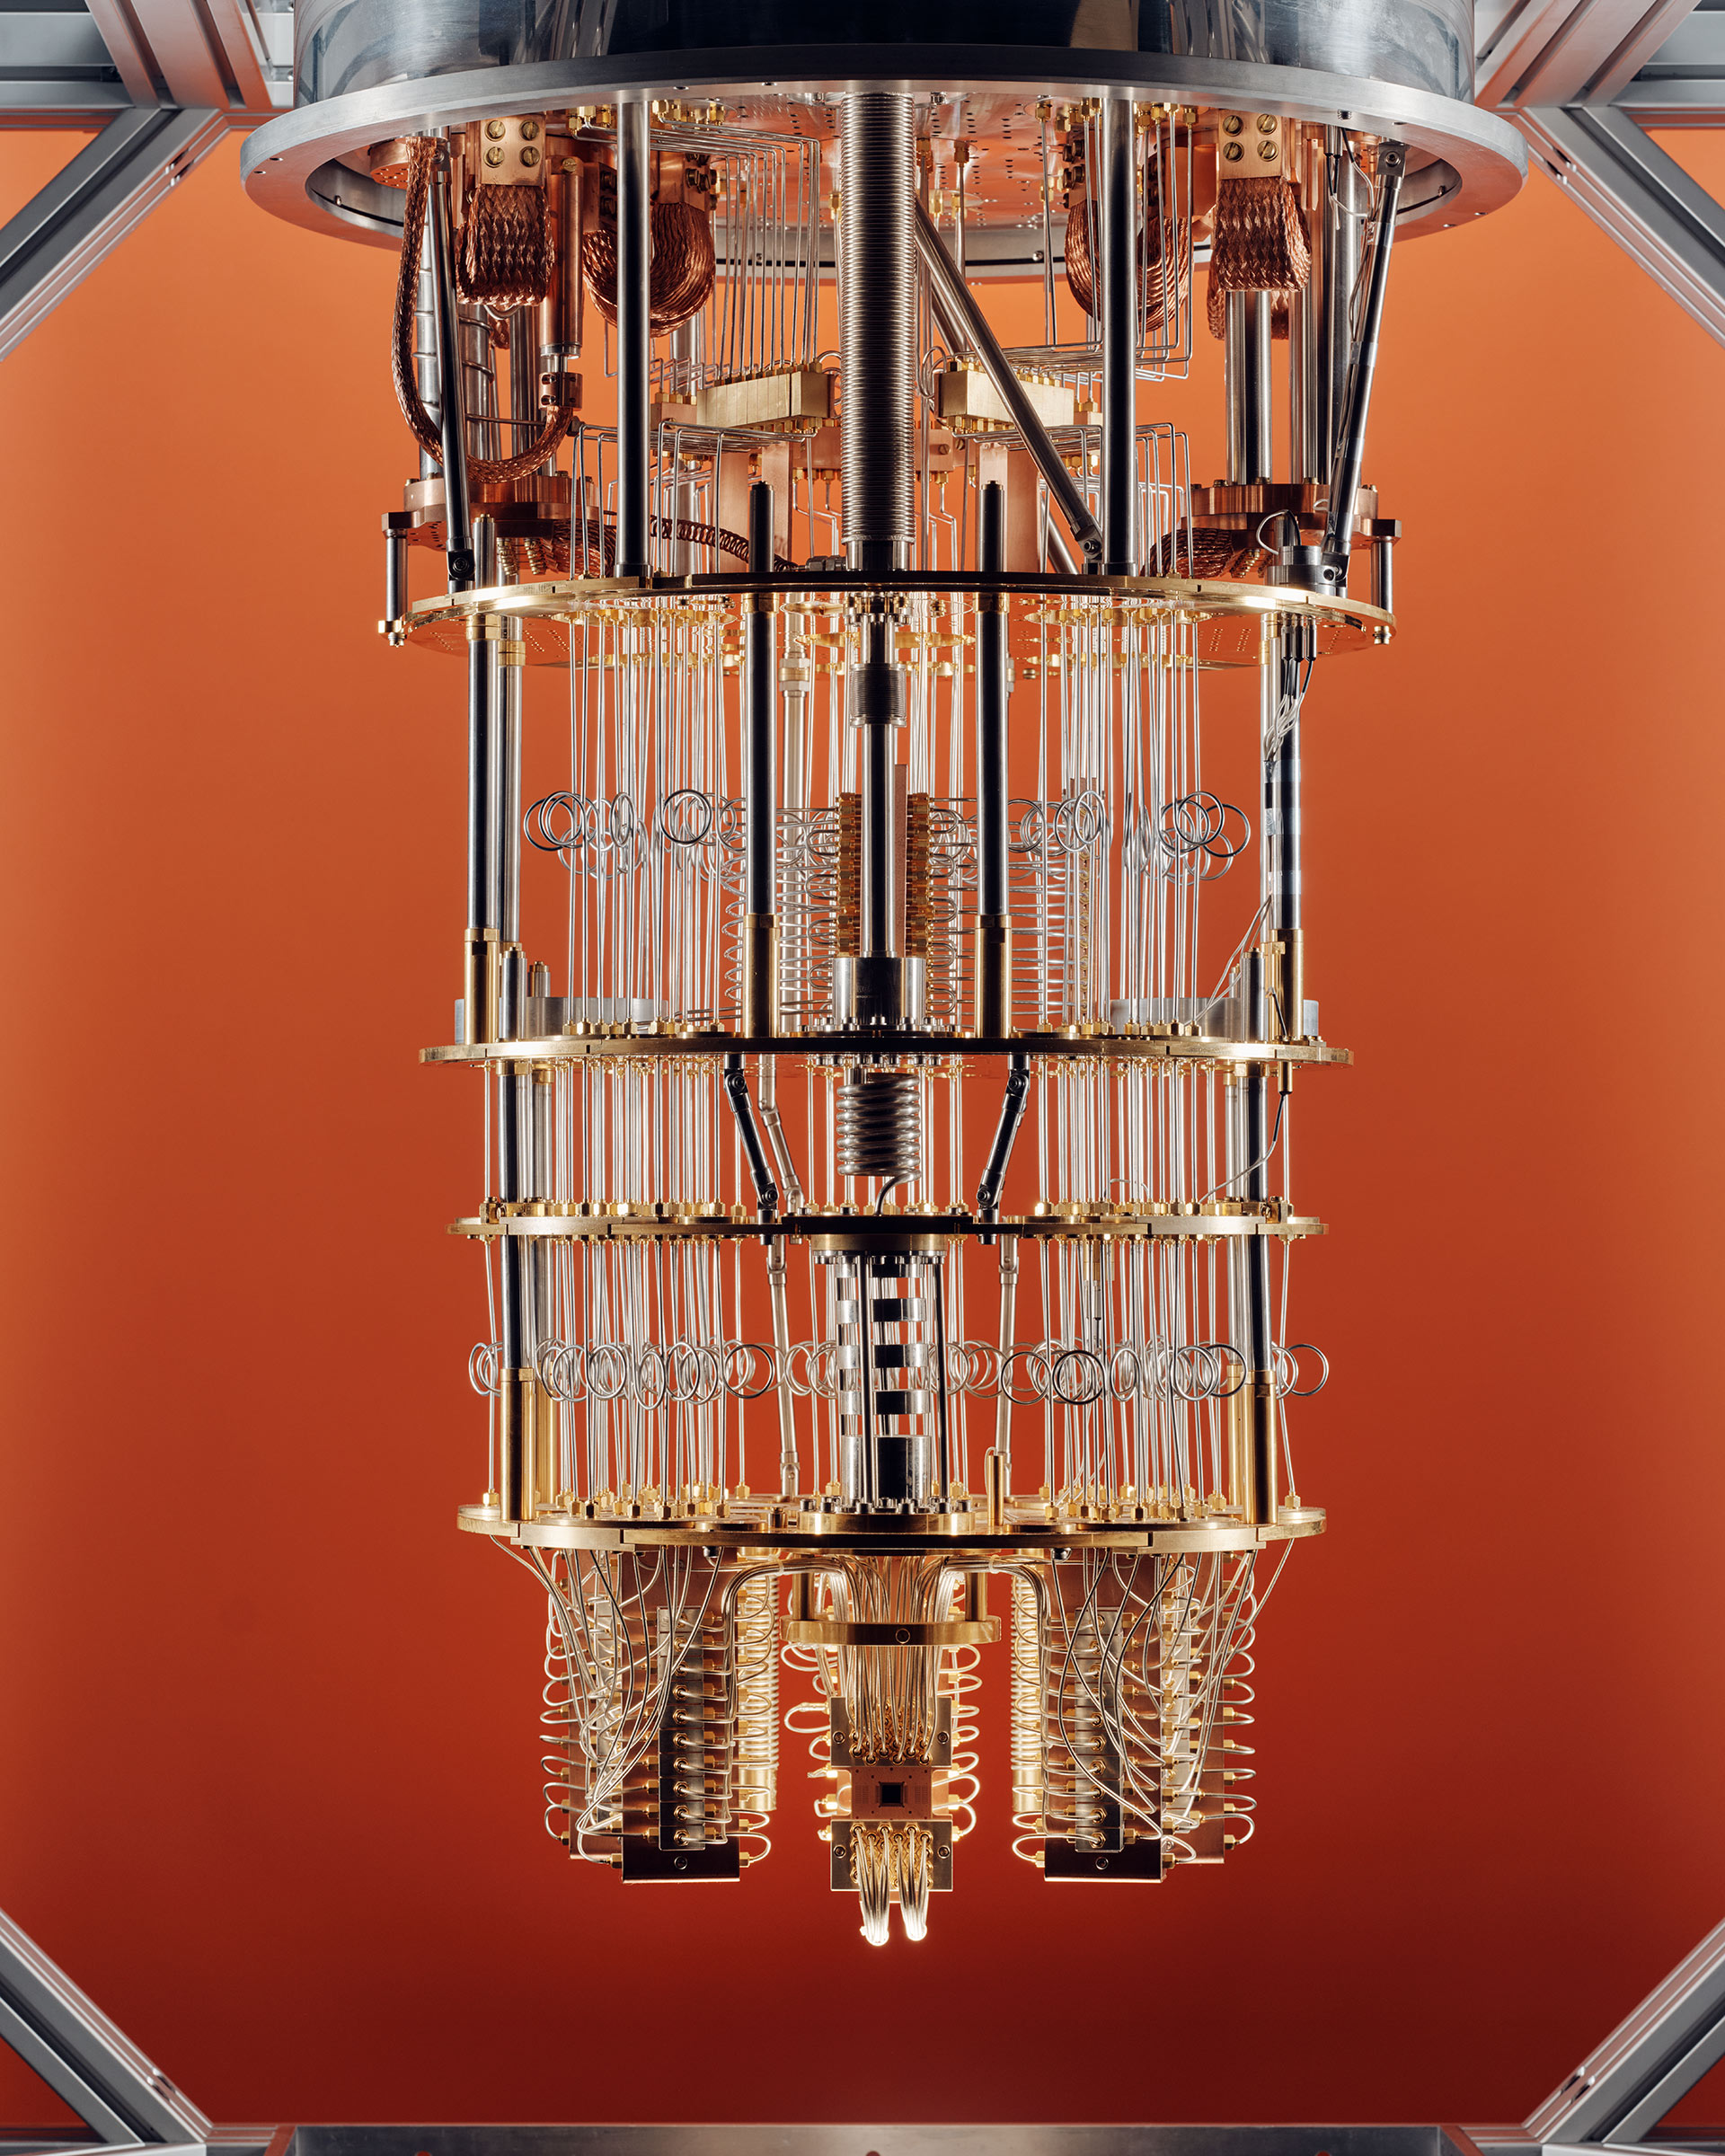 The “chandelier” inside a quantum computer at IBM is designed to cool its processing chip to a temperature lower than outer space. (Thomas Prior for TIME)